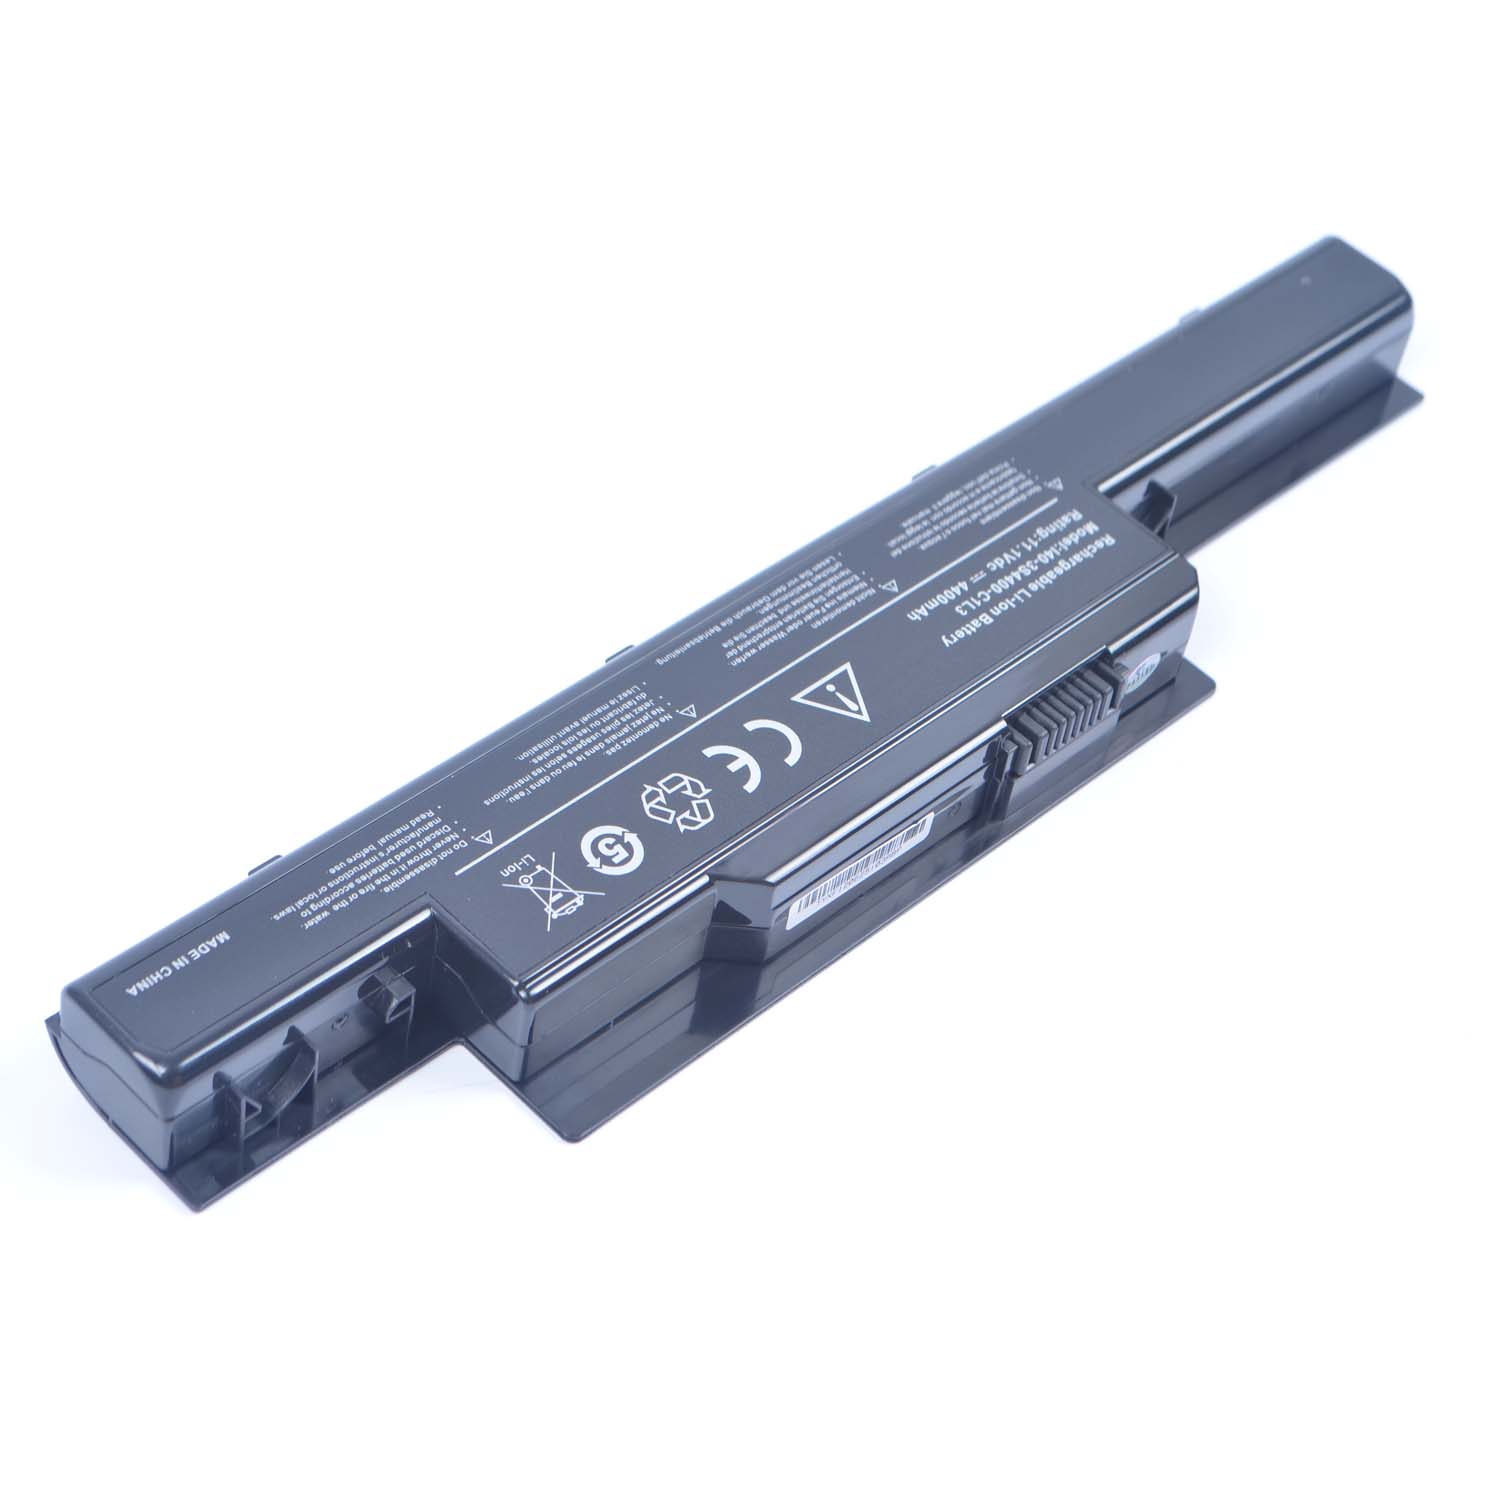 Replacement Battery for UNIWILL I40-4S2200-M1A2 battery